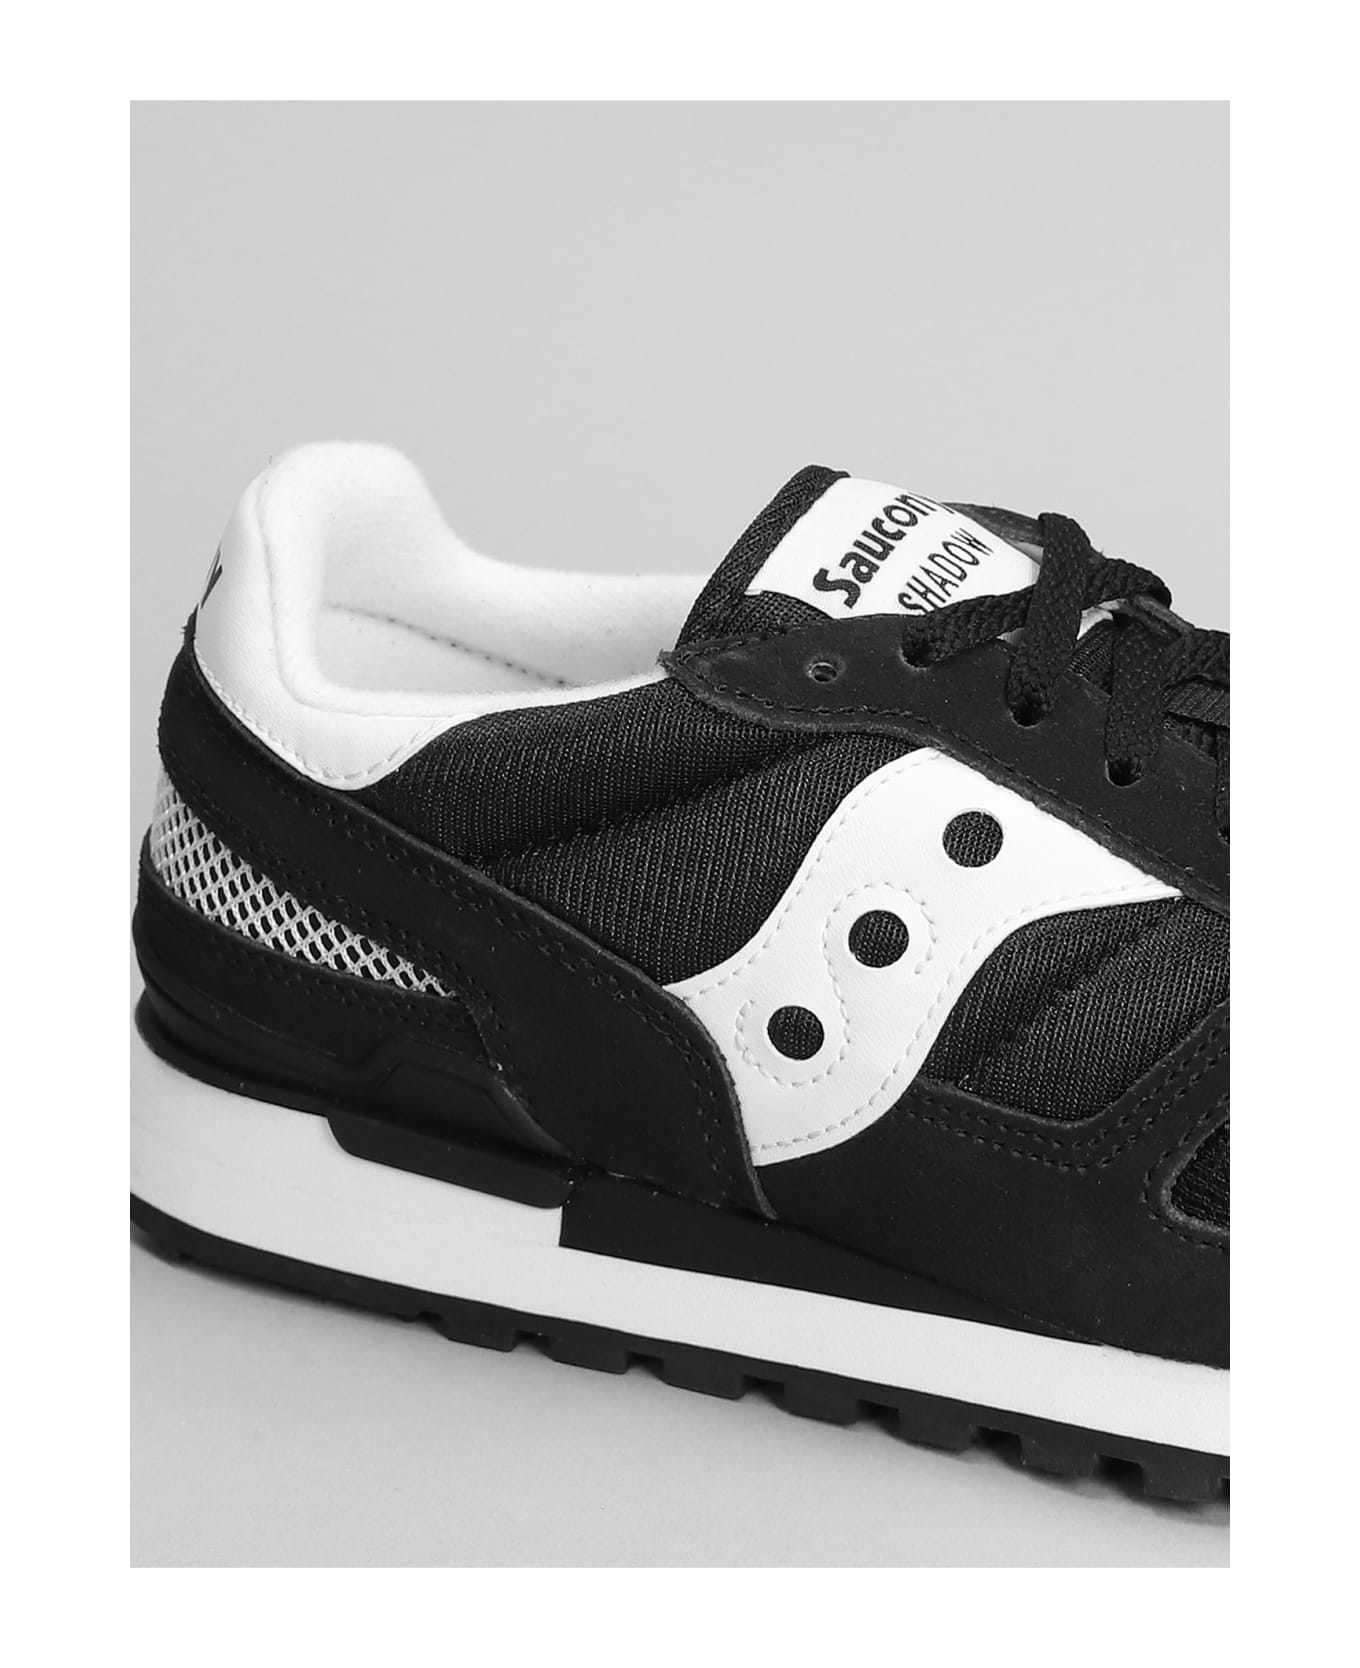 Saucony Shadow Original Sneakers In Black Suede And Fabric - Black Boston スニーカー